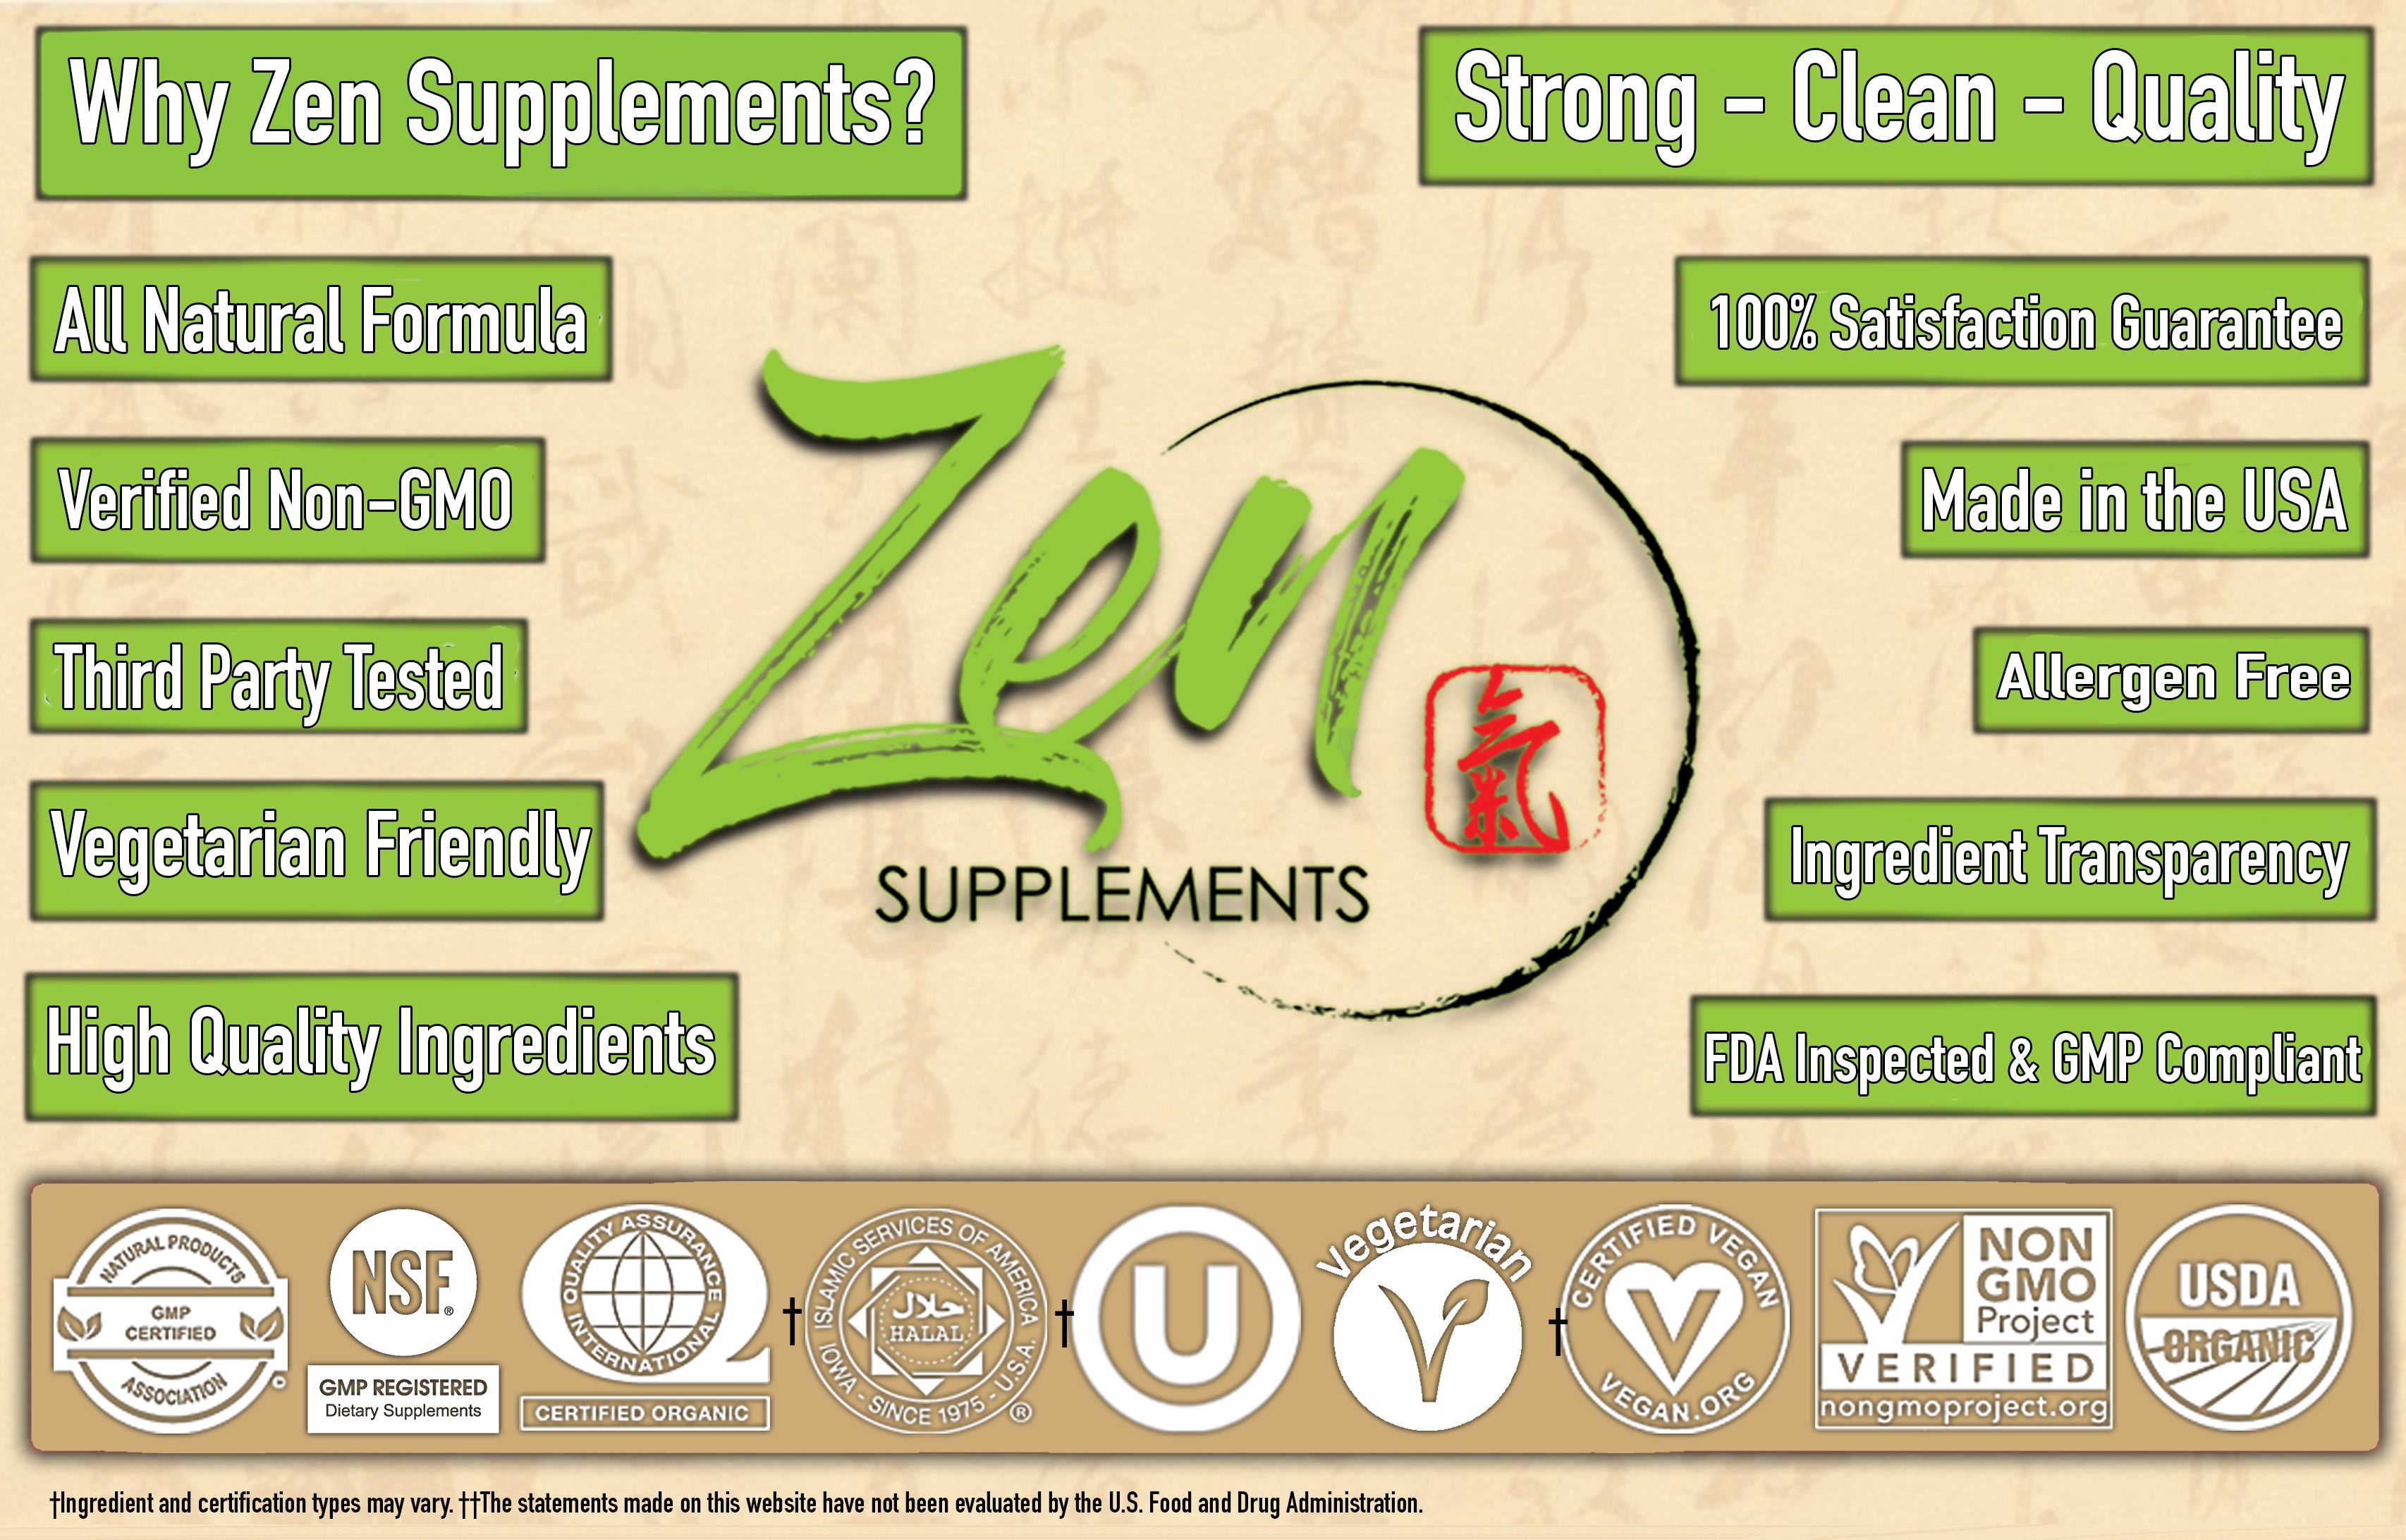 Zen Supplements - Garlic 500Mg Extract w/ 5,000 mcg Allicin - Enteric Coated 120-Tabs - Immune System & Healthy Heart Support Formula - Enteric Coated Tablets for Easy Swallowing & Digestion